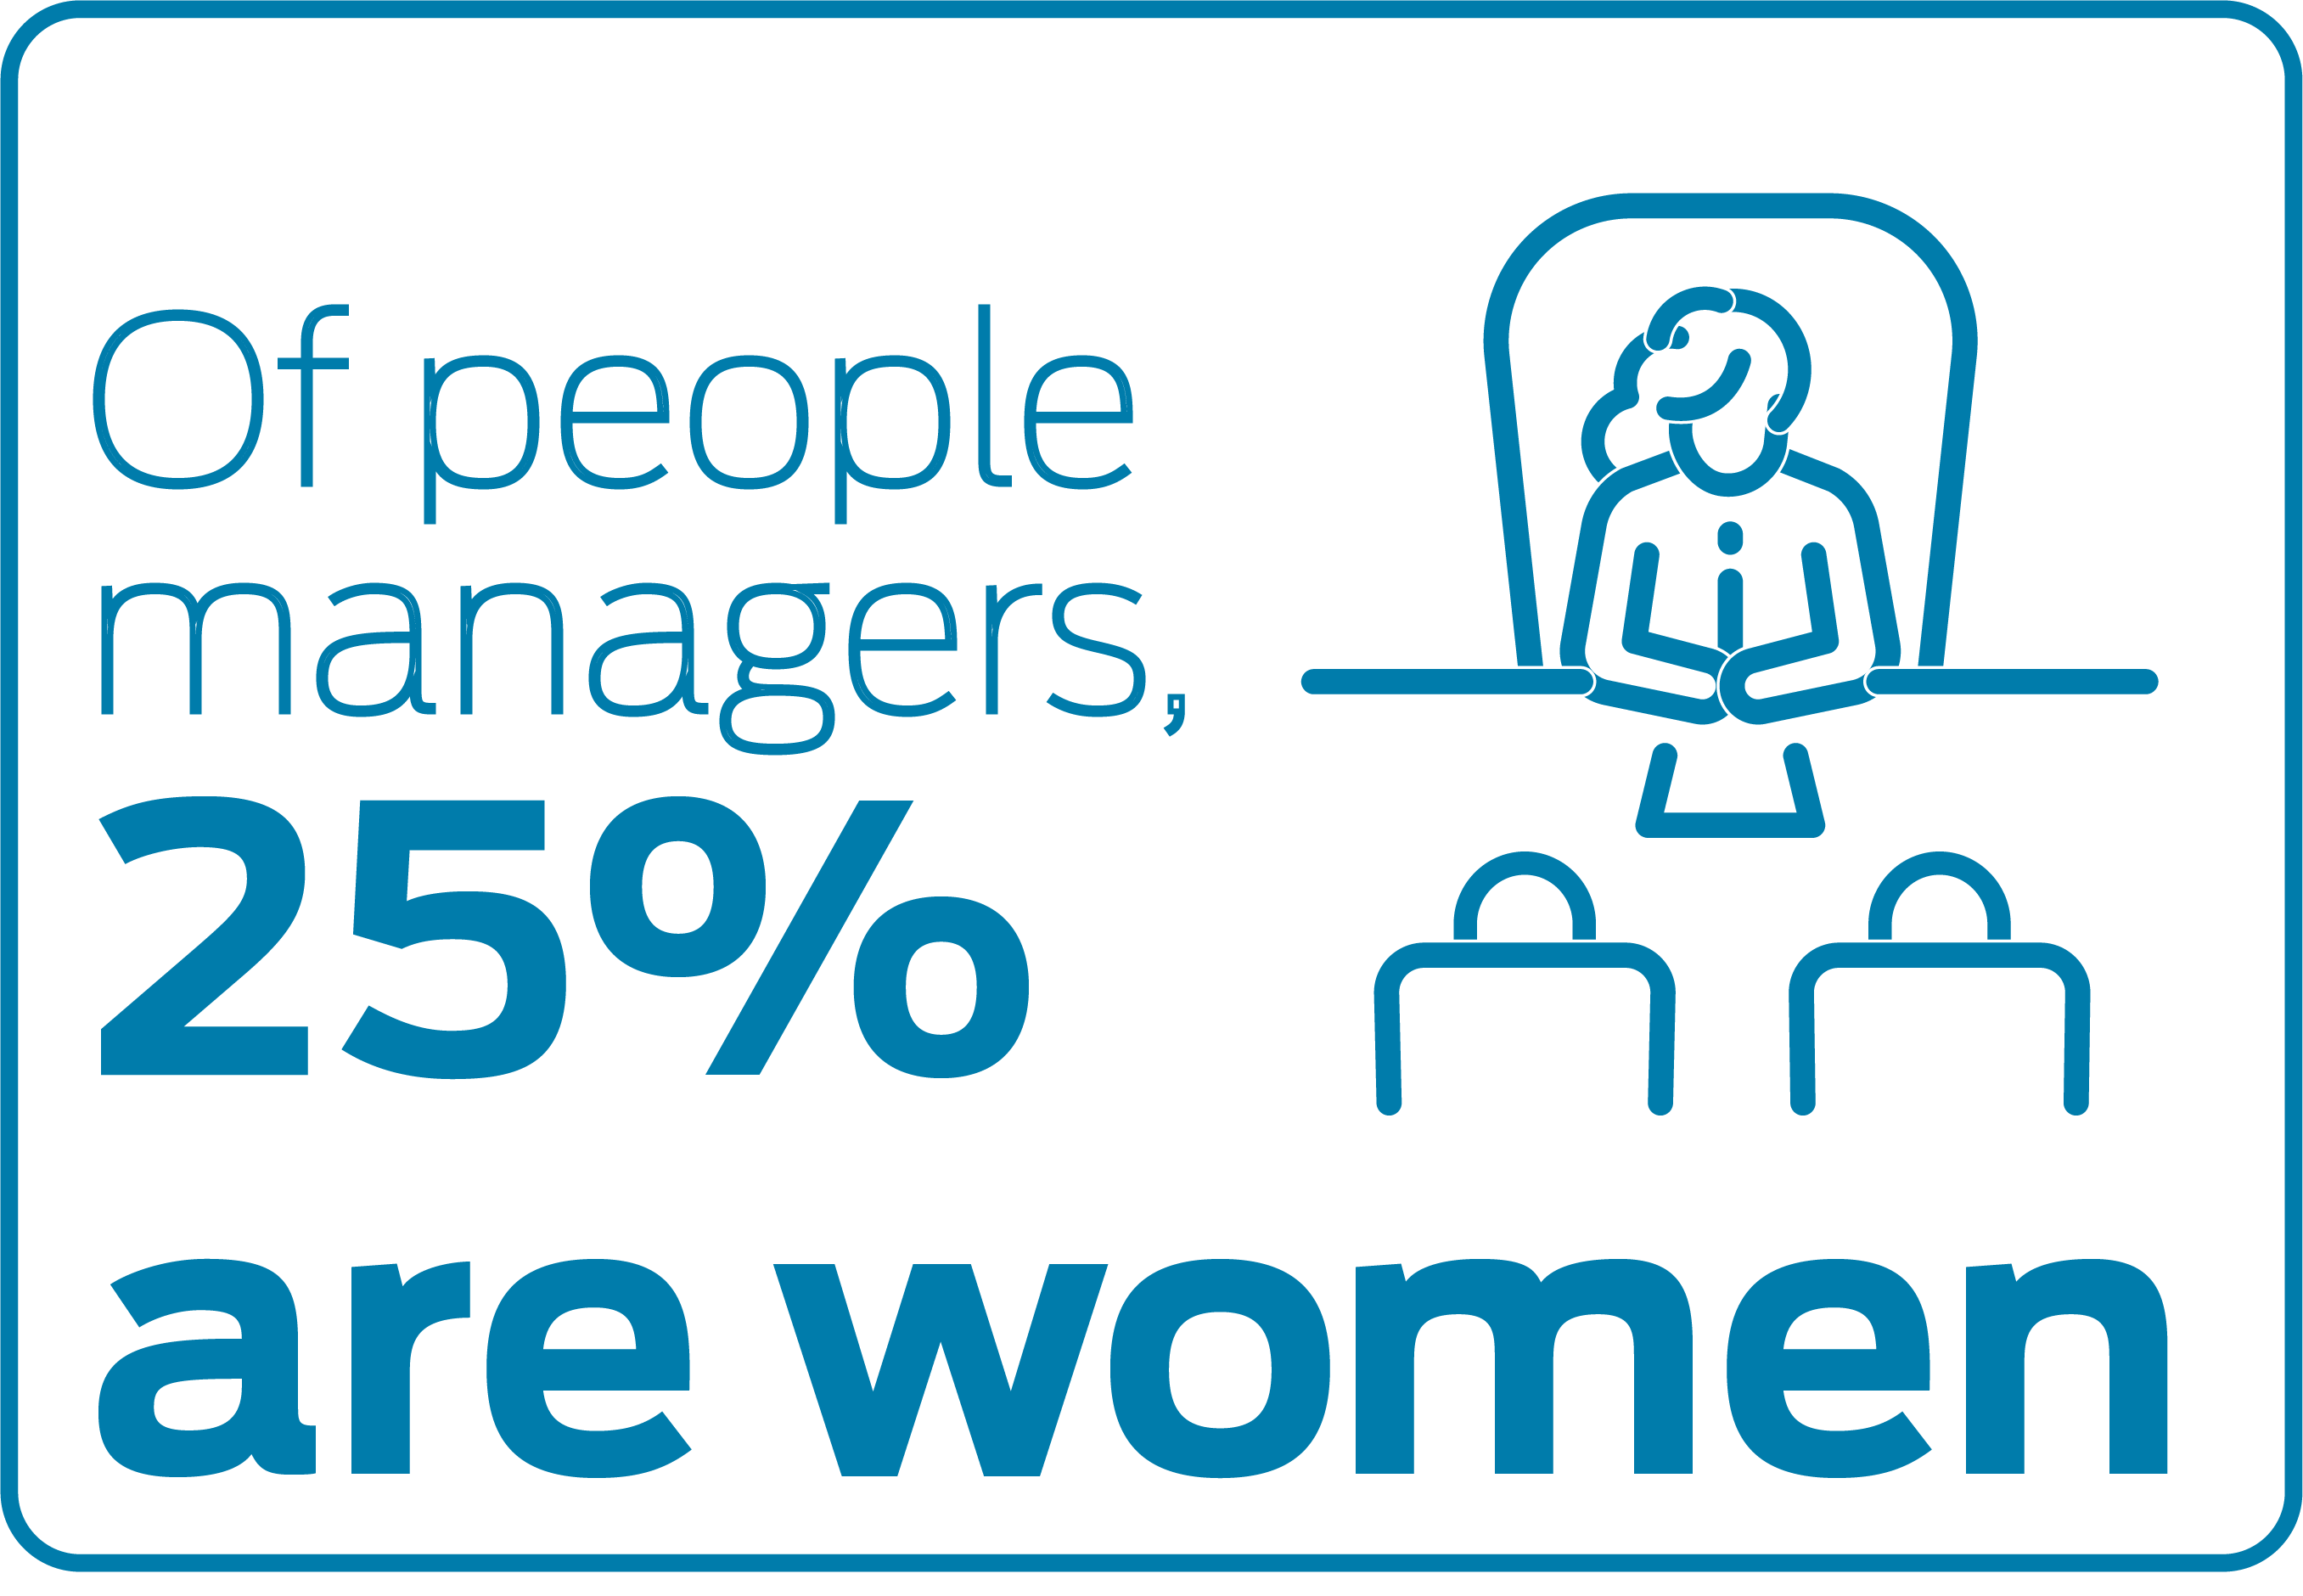 Of people managers, 25% are women